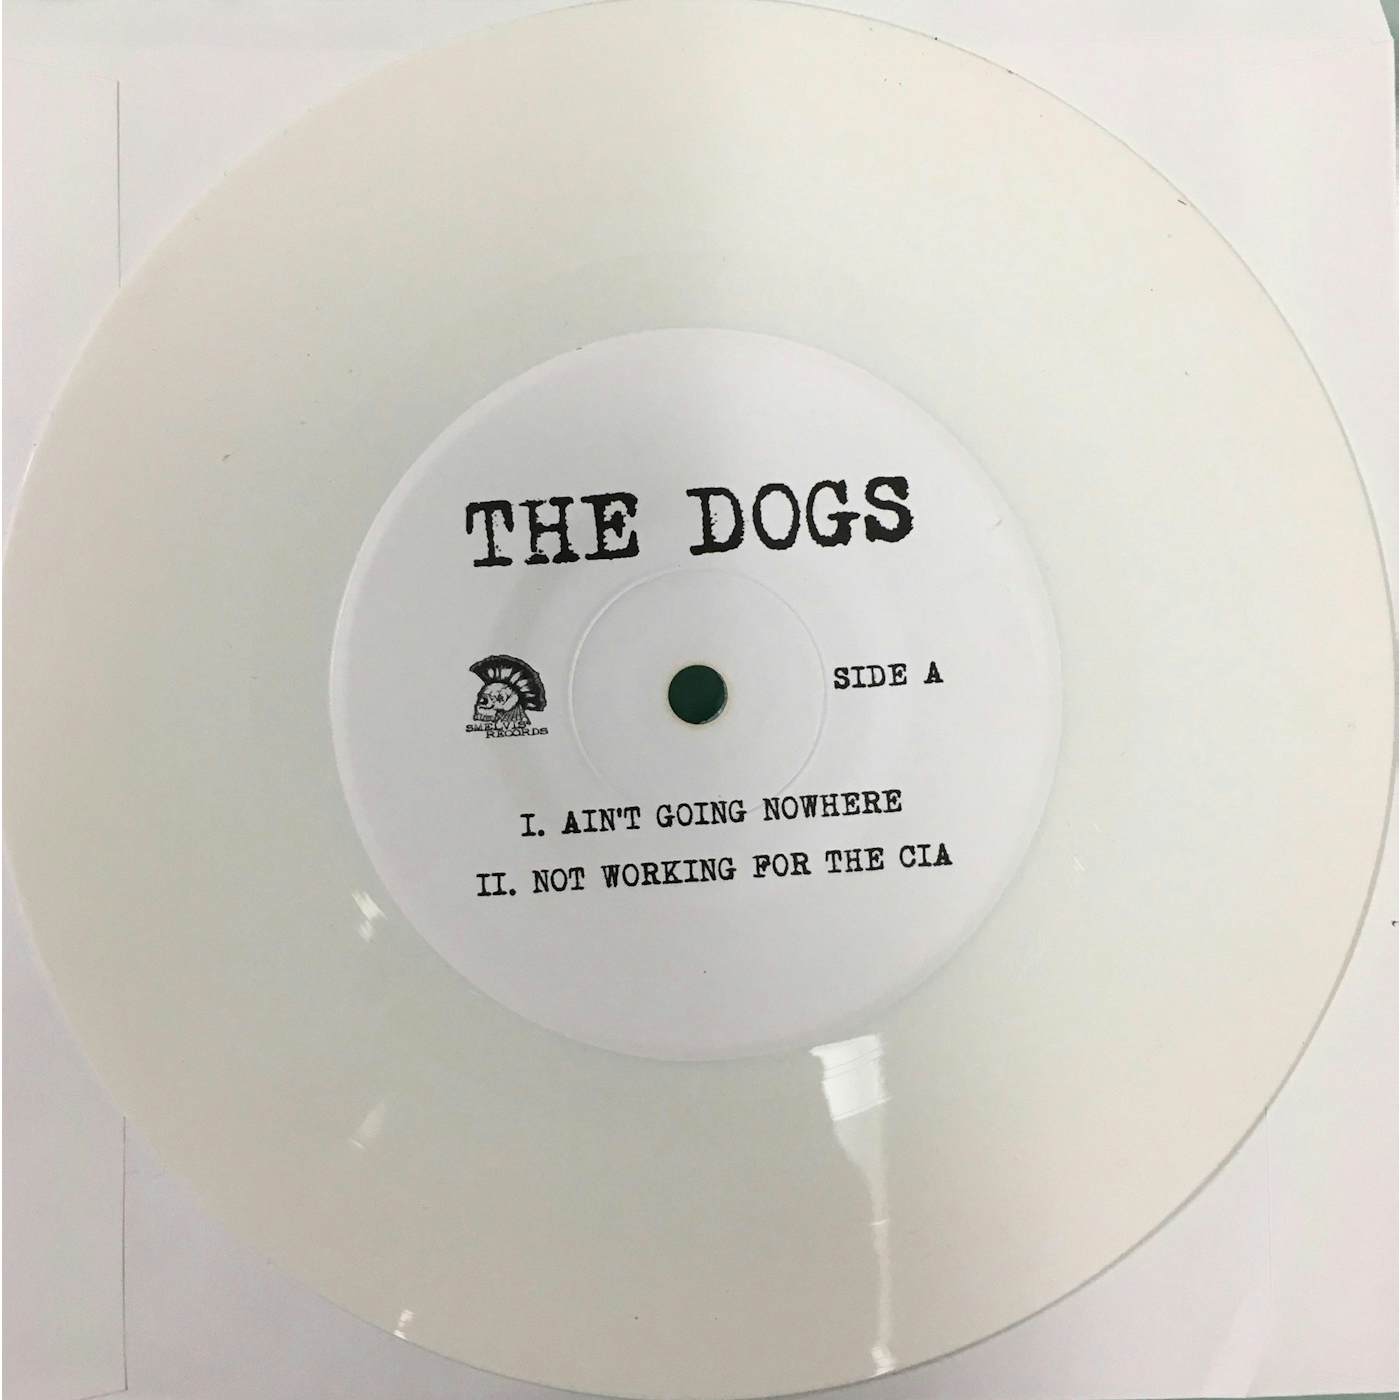 The Dogs "Ain't Going Nowhere " 7" (Vinyl)